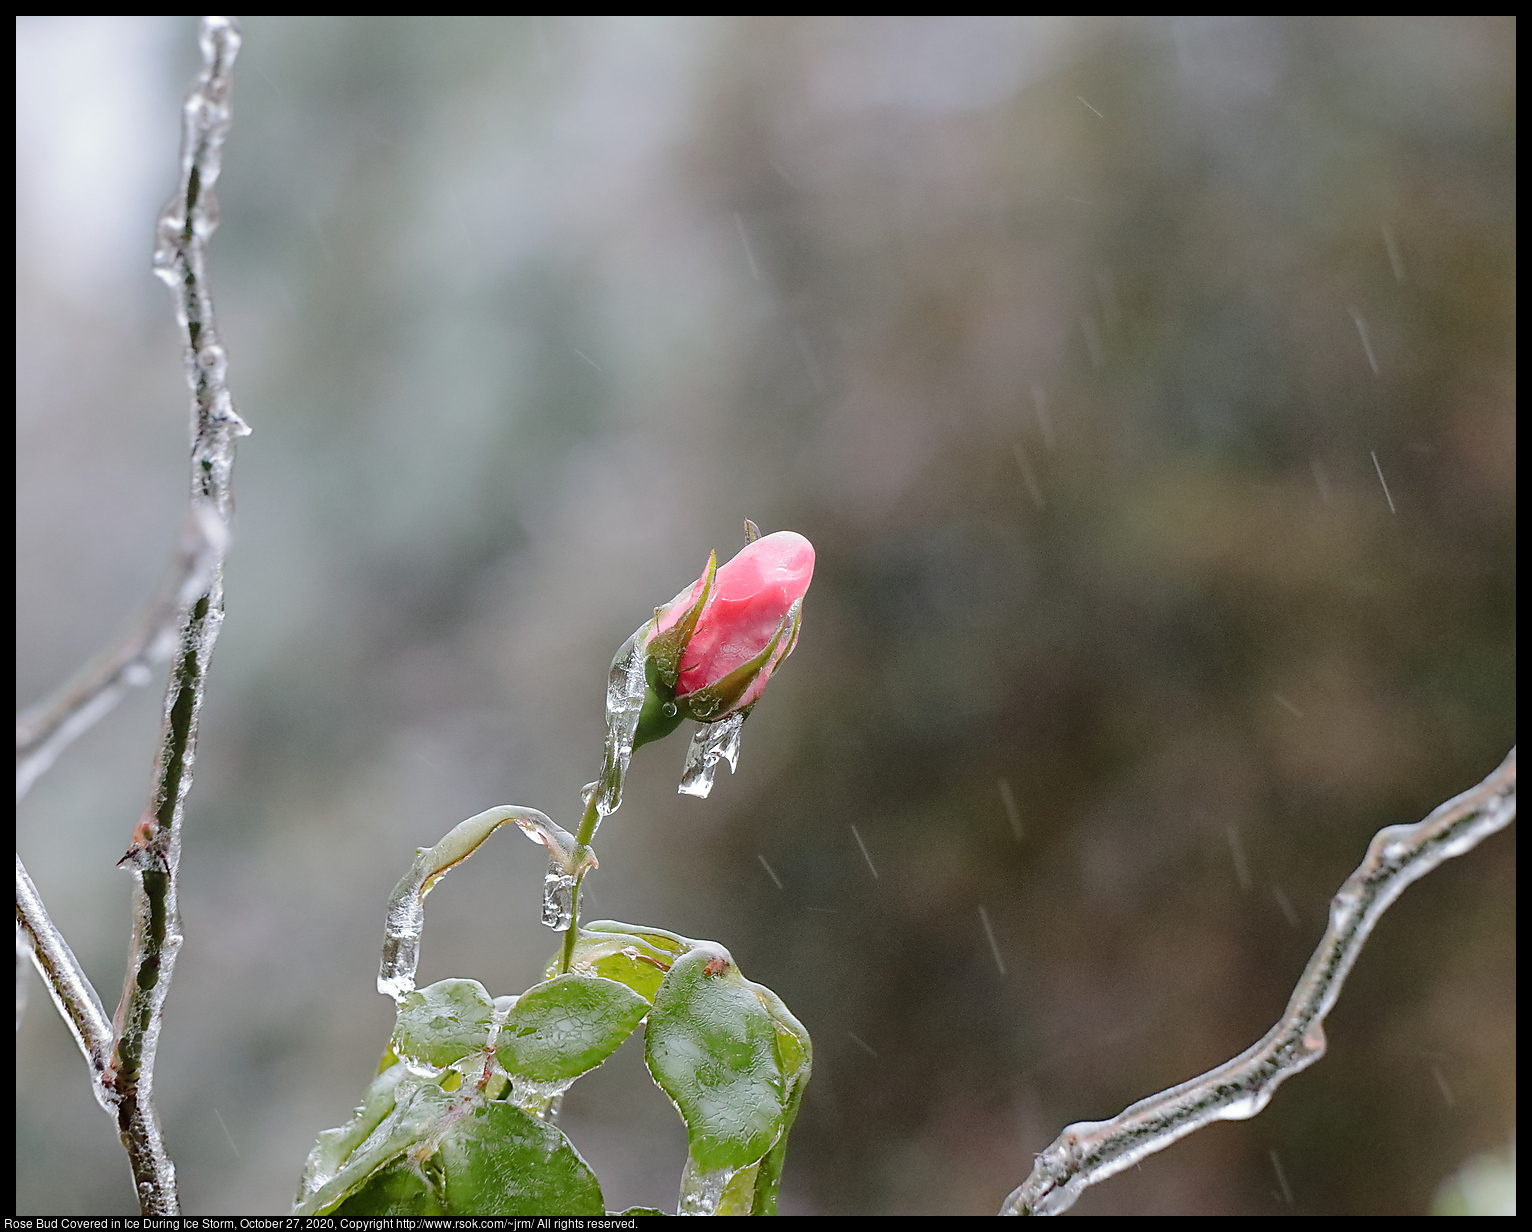 Rose Bud Covered in Ice During Ice Storm, October 27, 2020